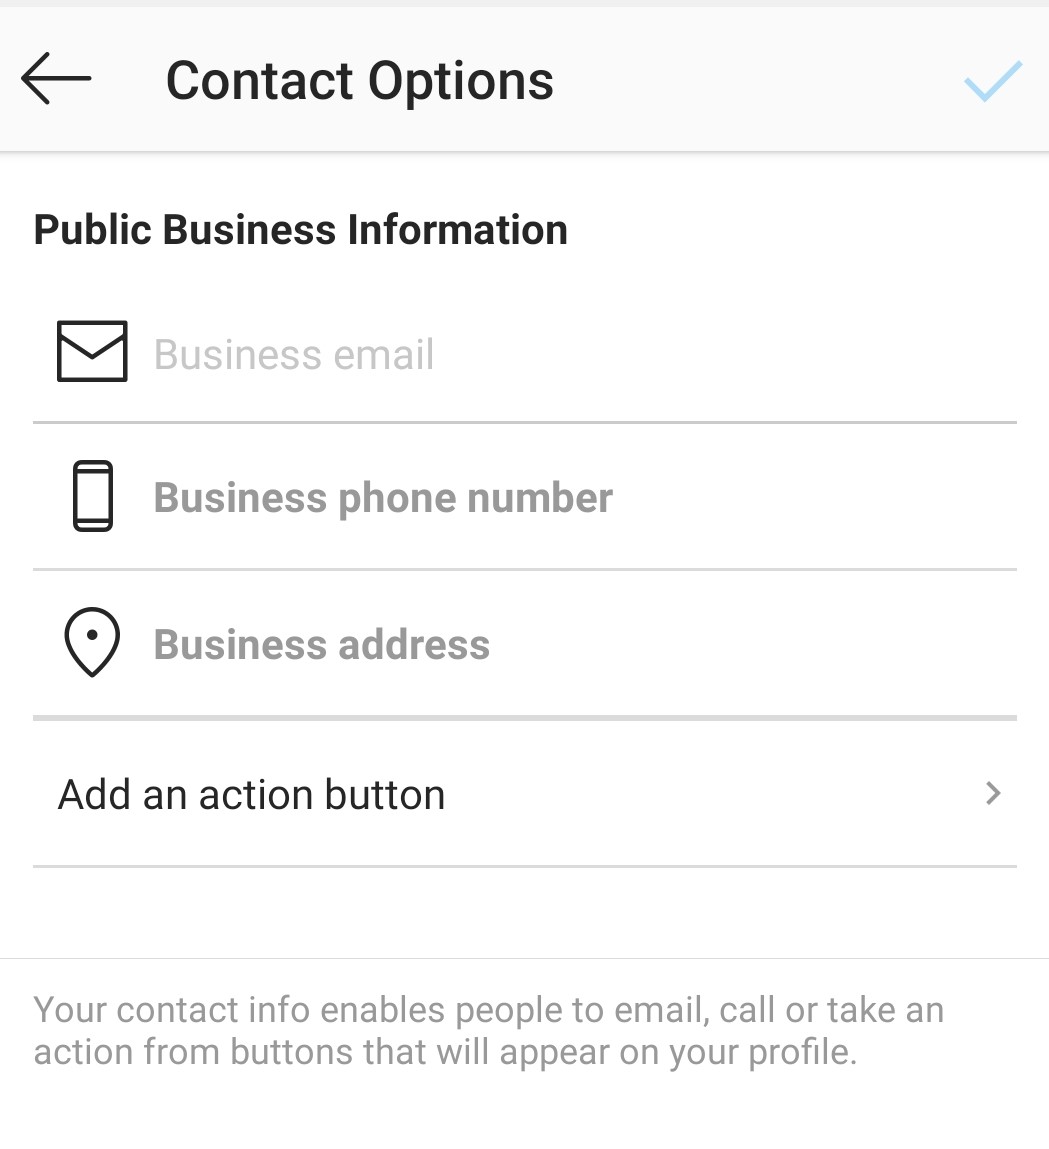 Contact options